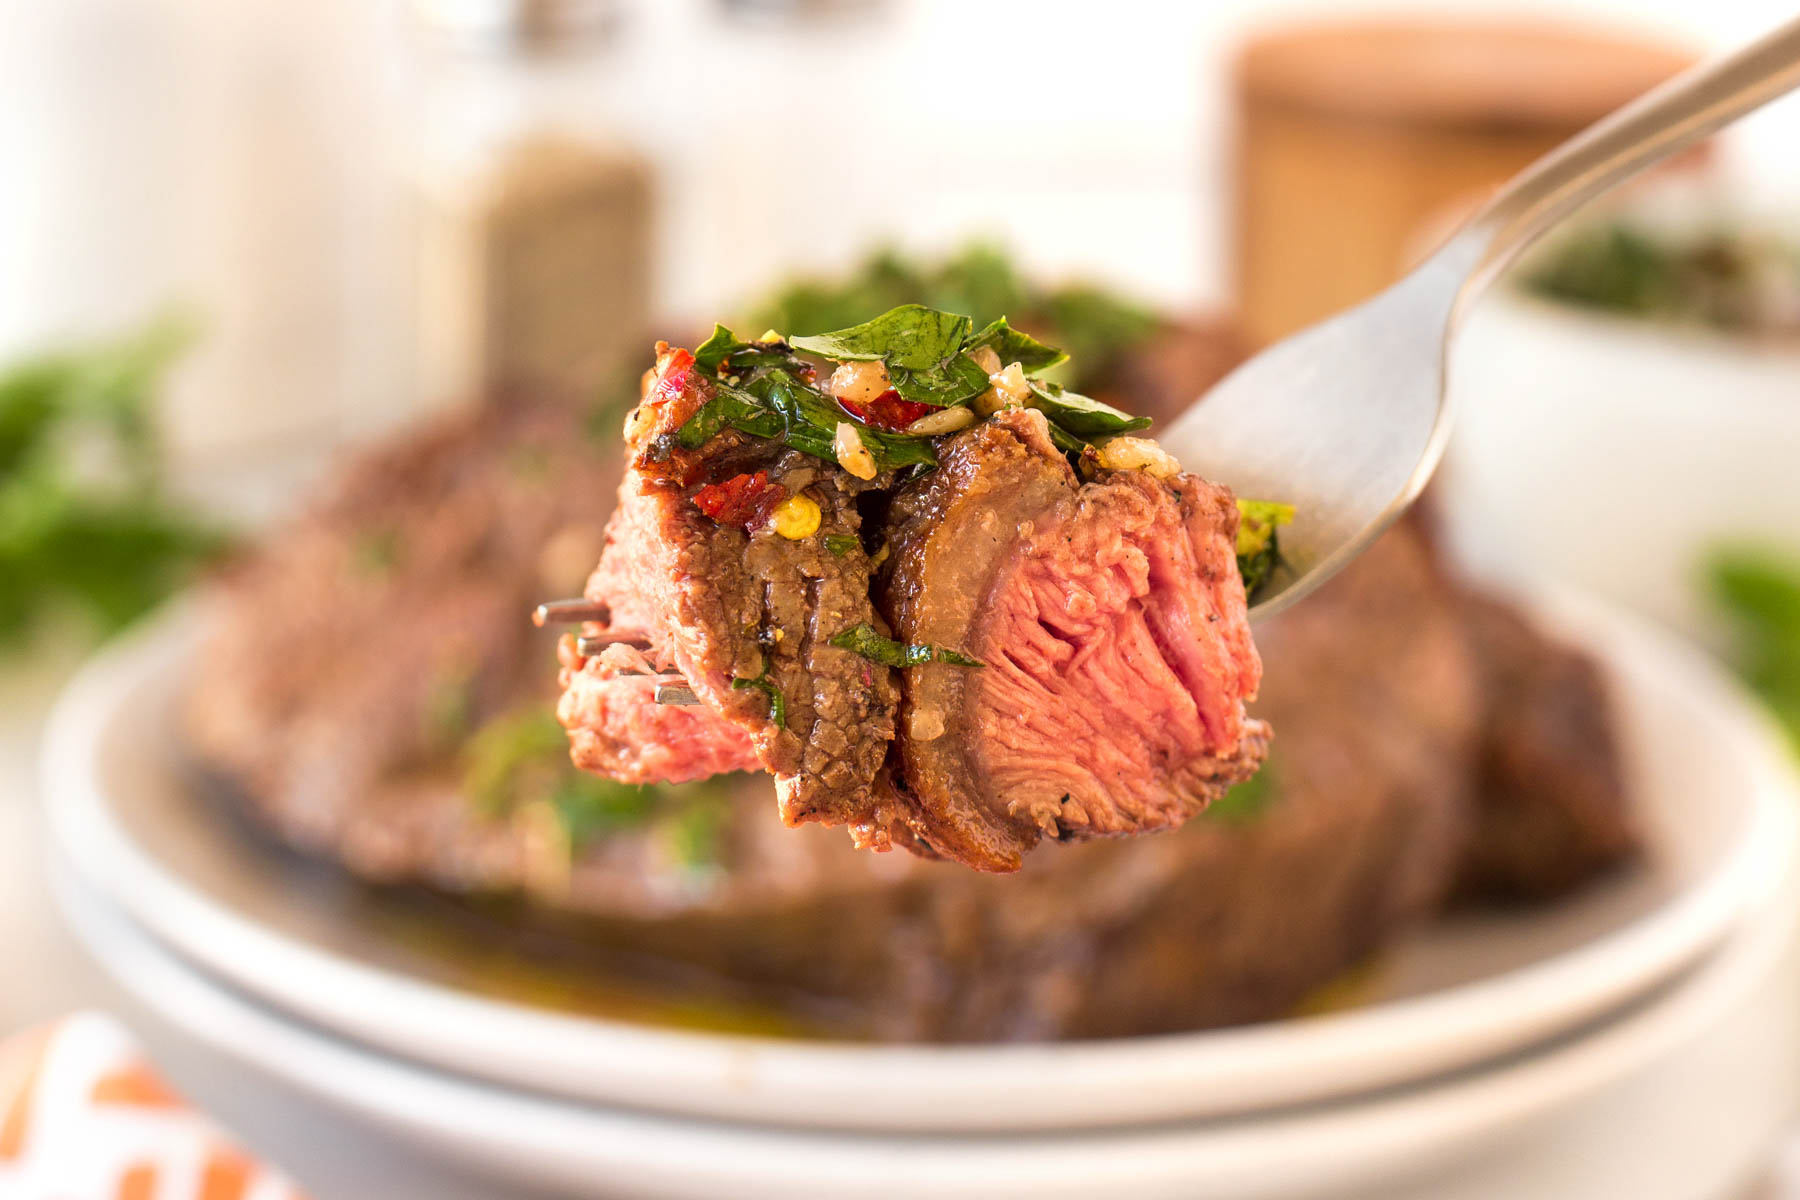 Fork full or Grilled Picanha Steak with chimichurri.